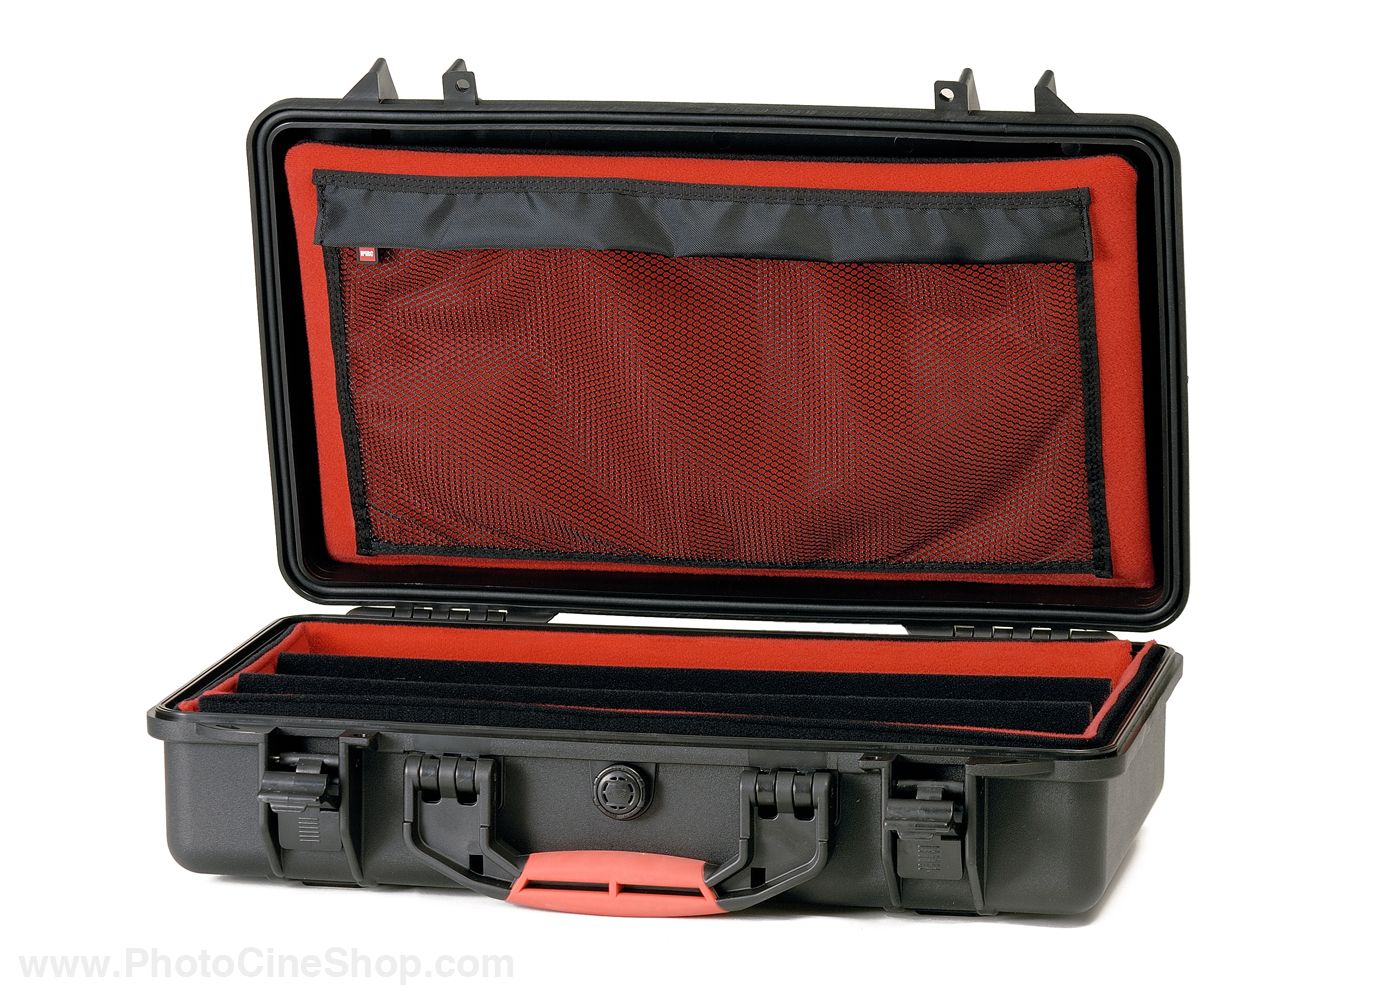 HPRC - Case 2530 with Soft Deck and Dividers - Black